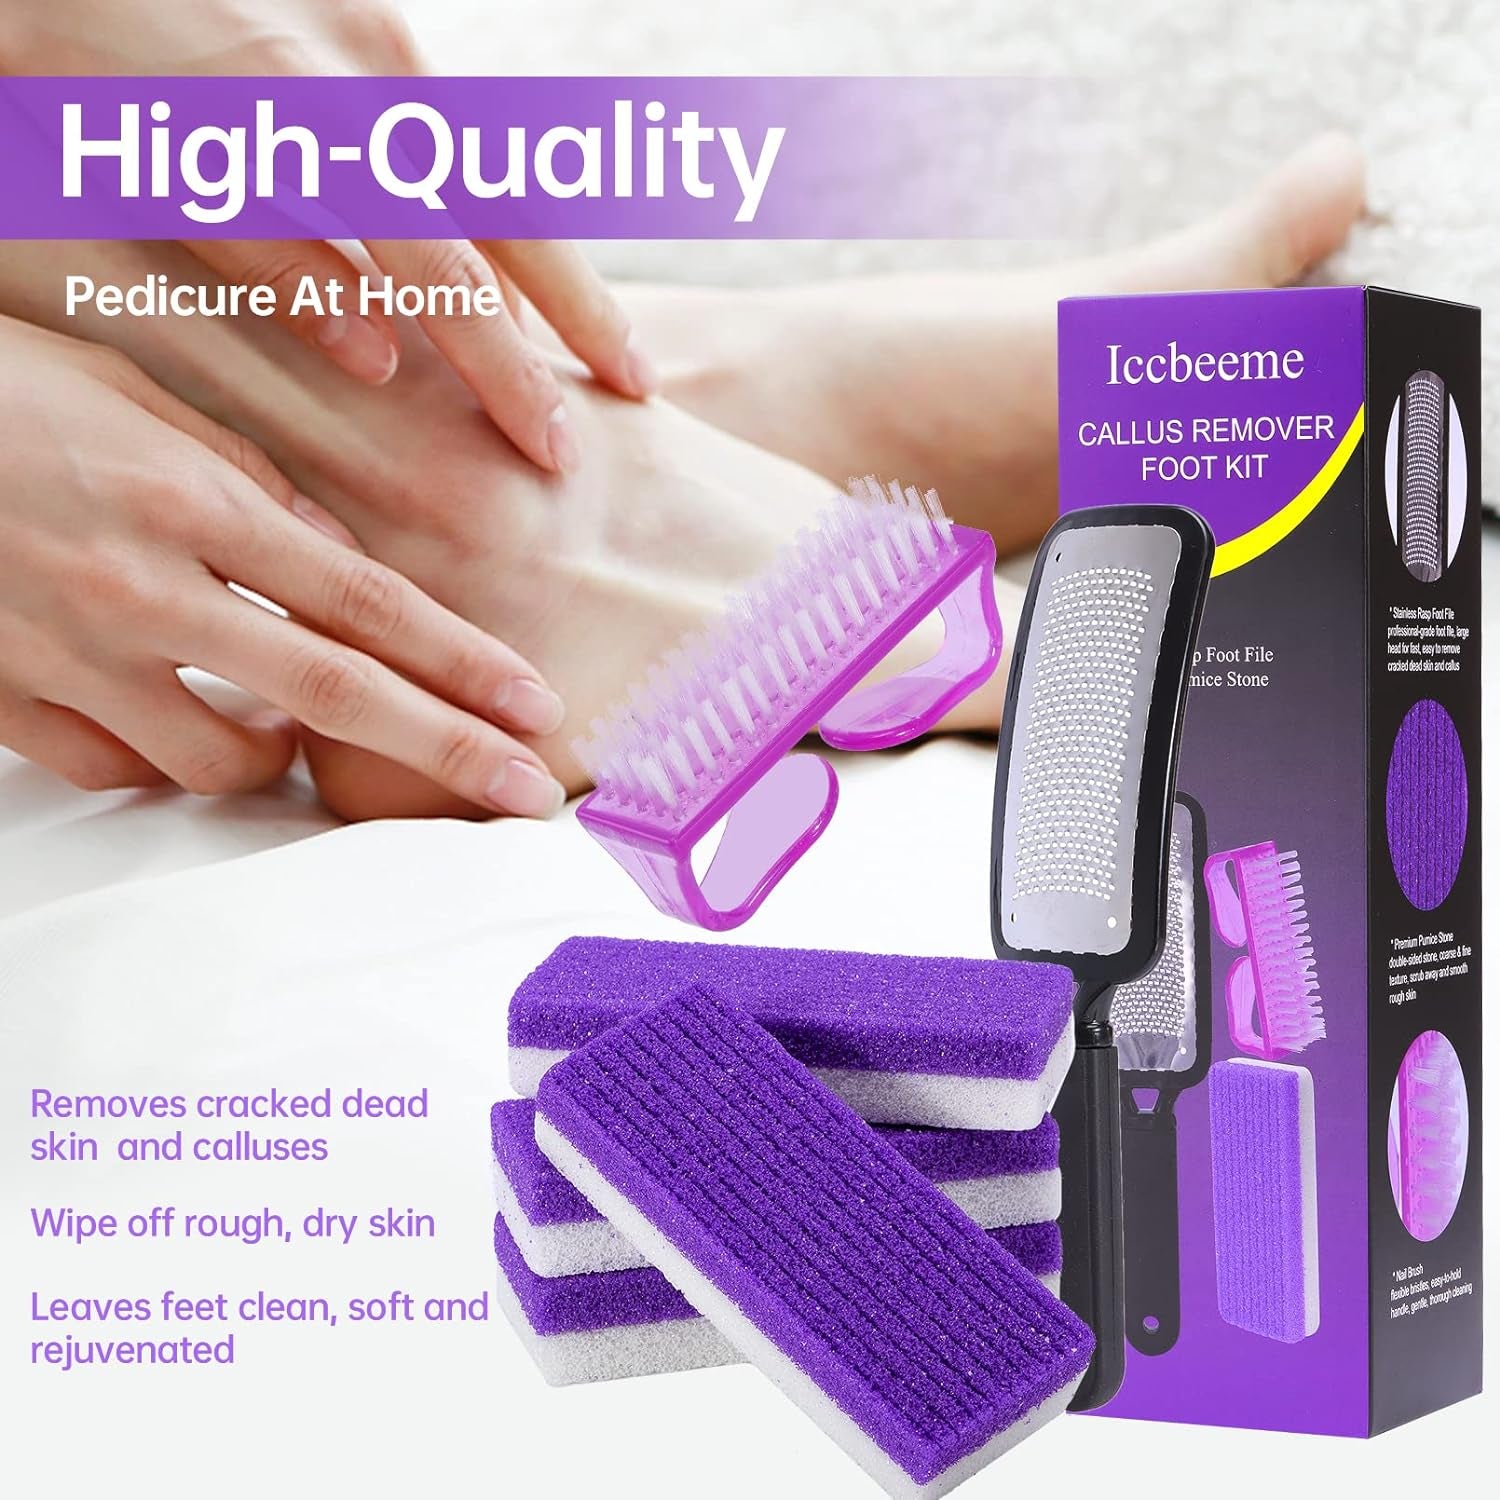 Foot Callus Remover Set,Pedicure Kit Includes 1 Stainless Foot Rasp Foot File,4 Foot Pumice Stone & 1 Nail Brush,Foot Scrubber Remove Hard Dry Skin,Foot Care Pedicure Tools for Wet and Dry Feet,Purple